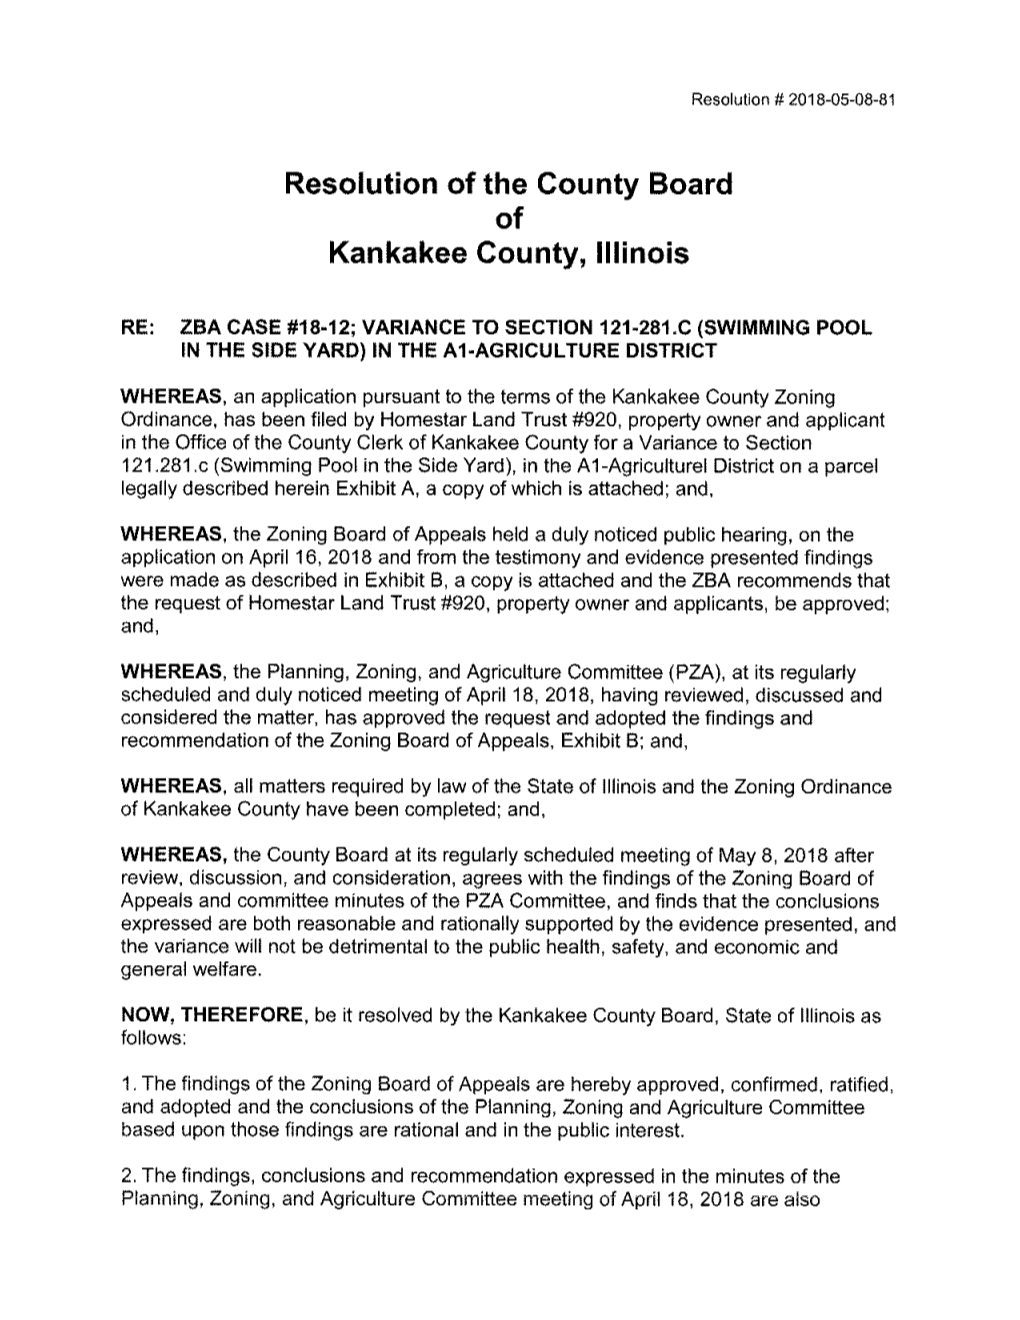 Resolution of the County Board of Kankakee County, Illinois